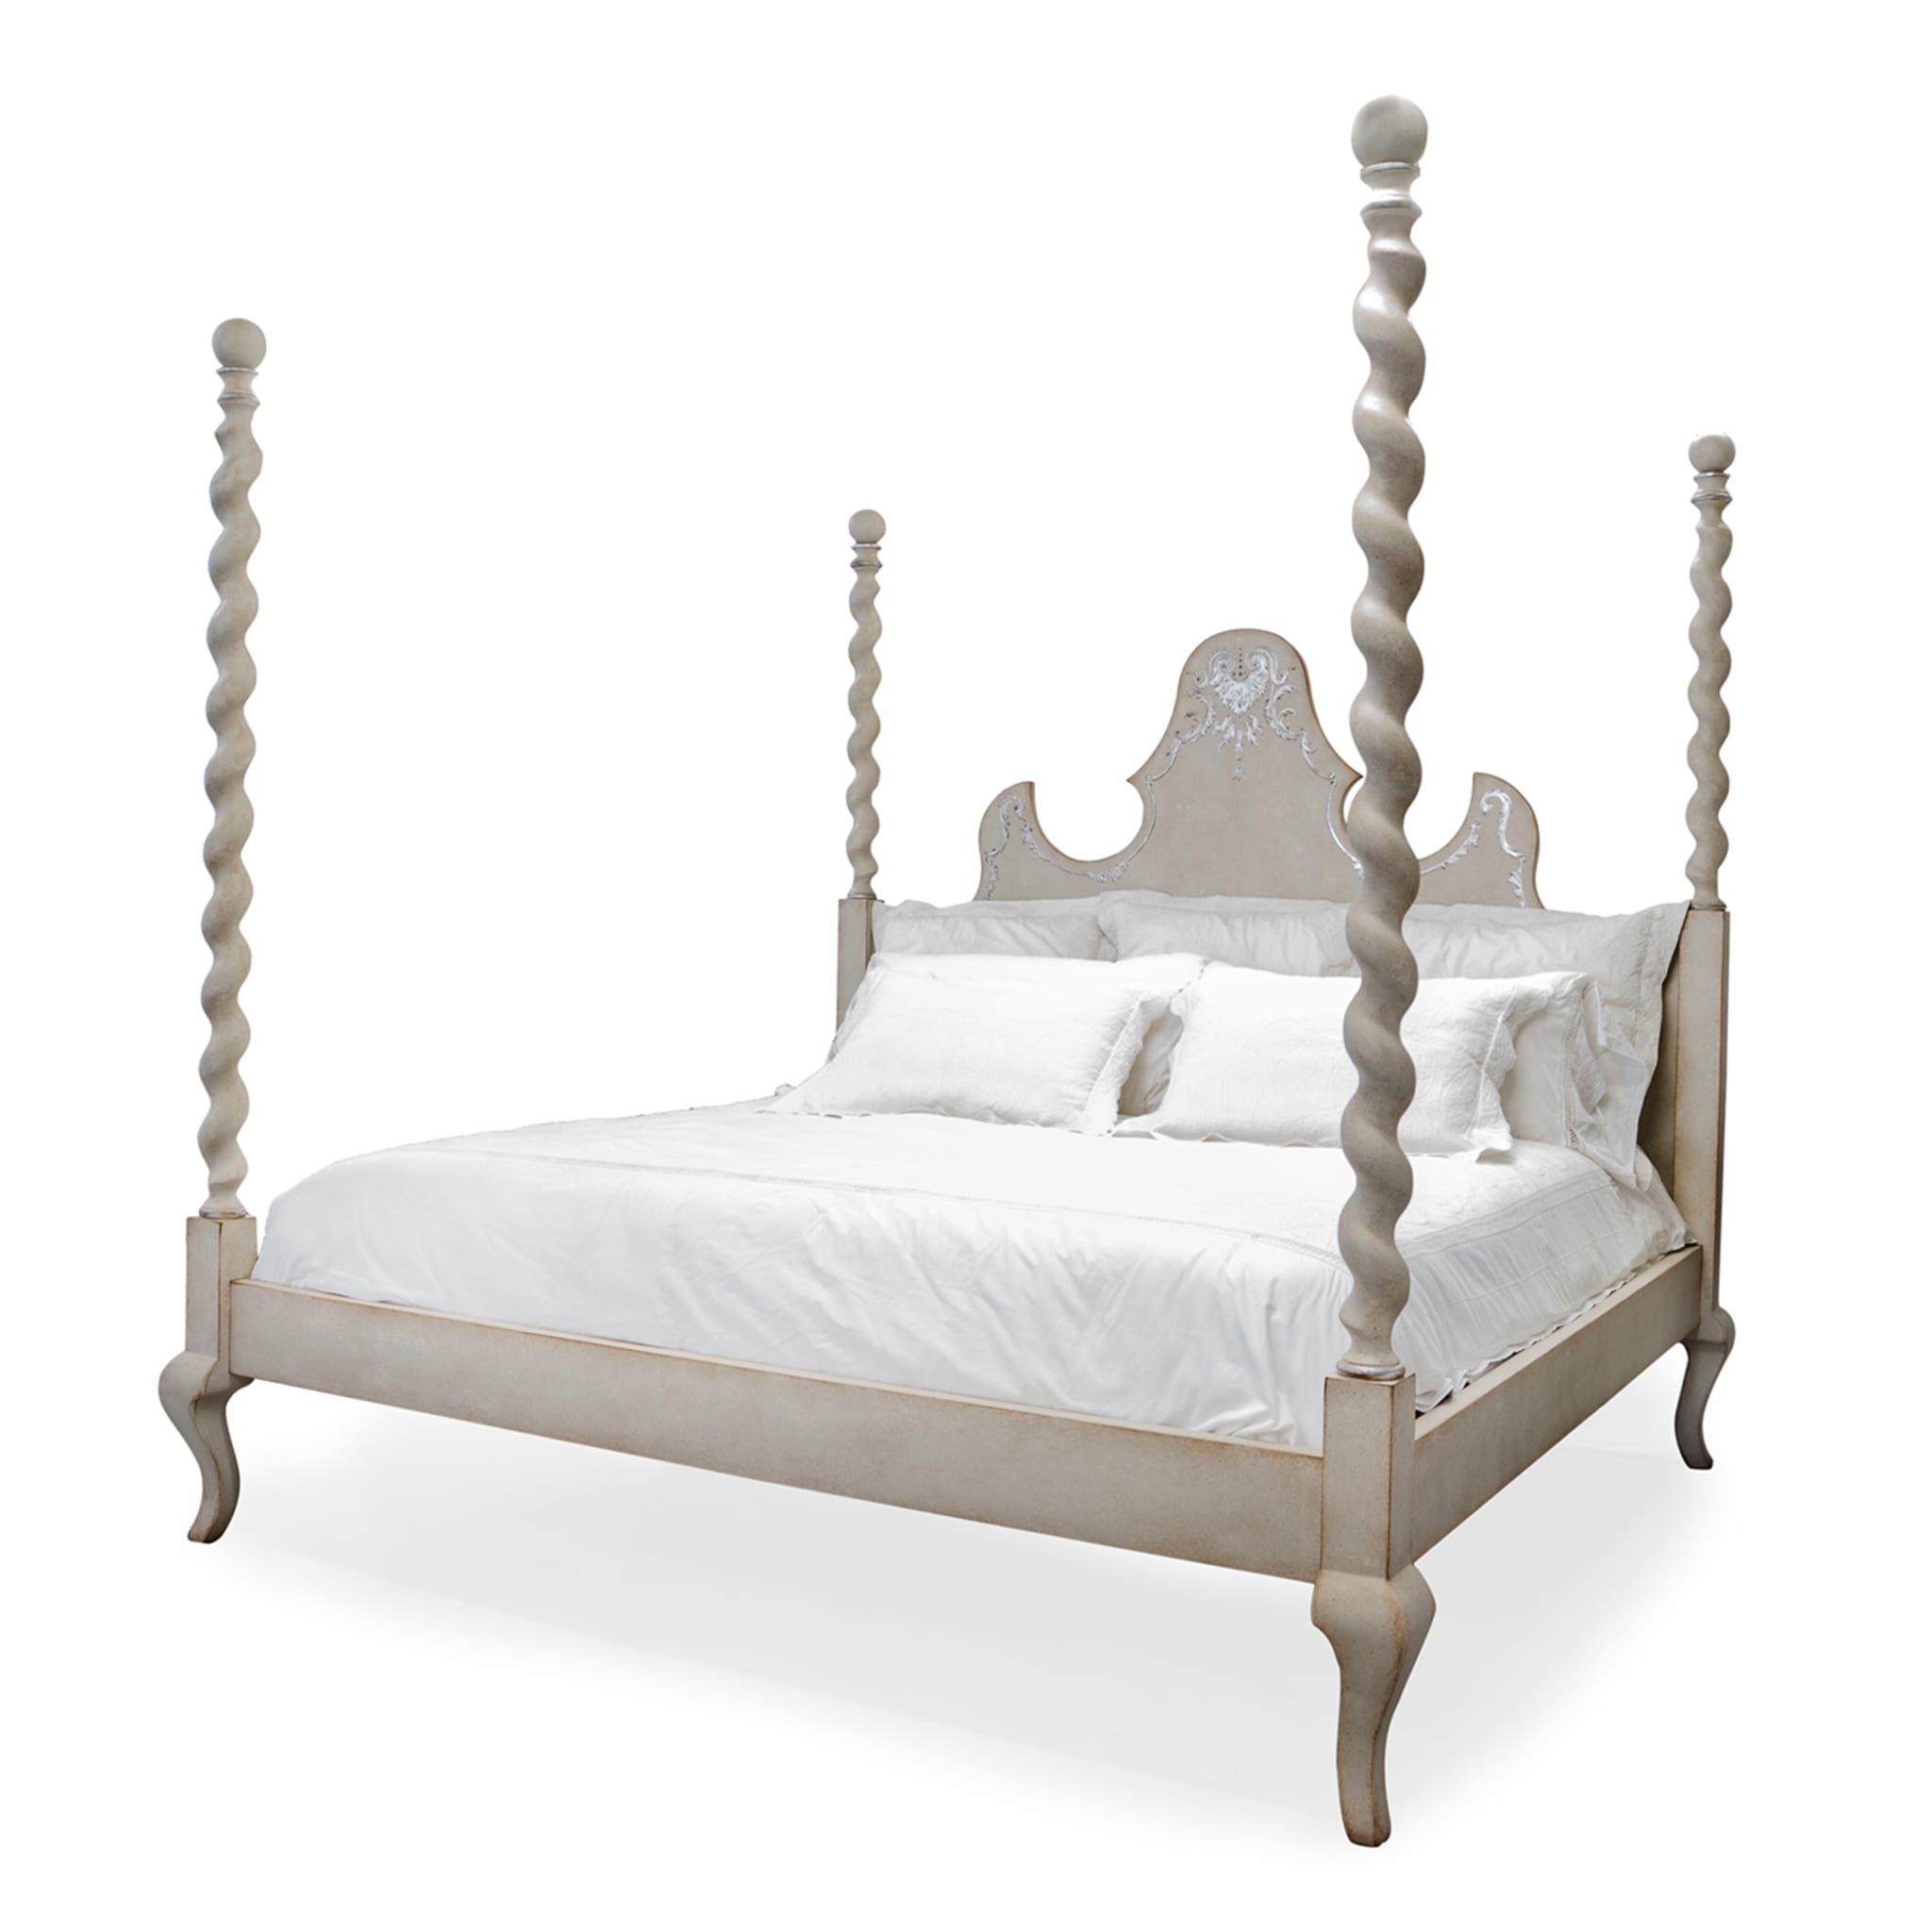 Giotto Silver Textural Decorations King Size Bed - Alternative view 1